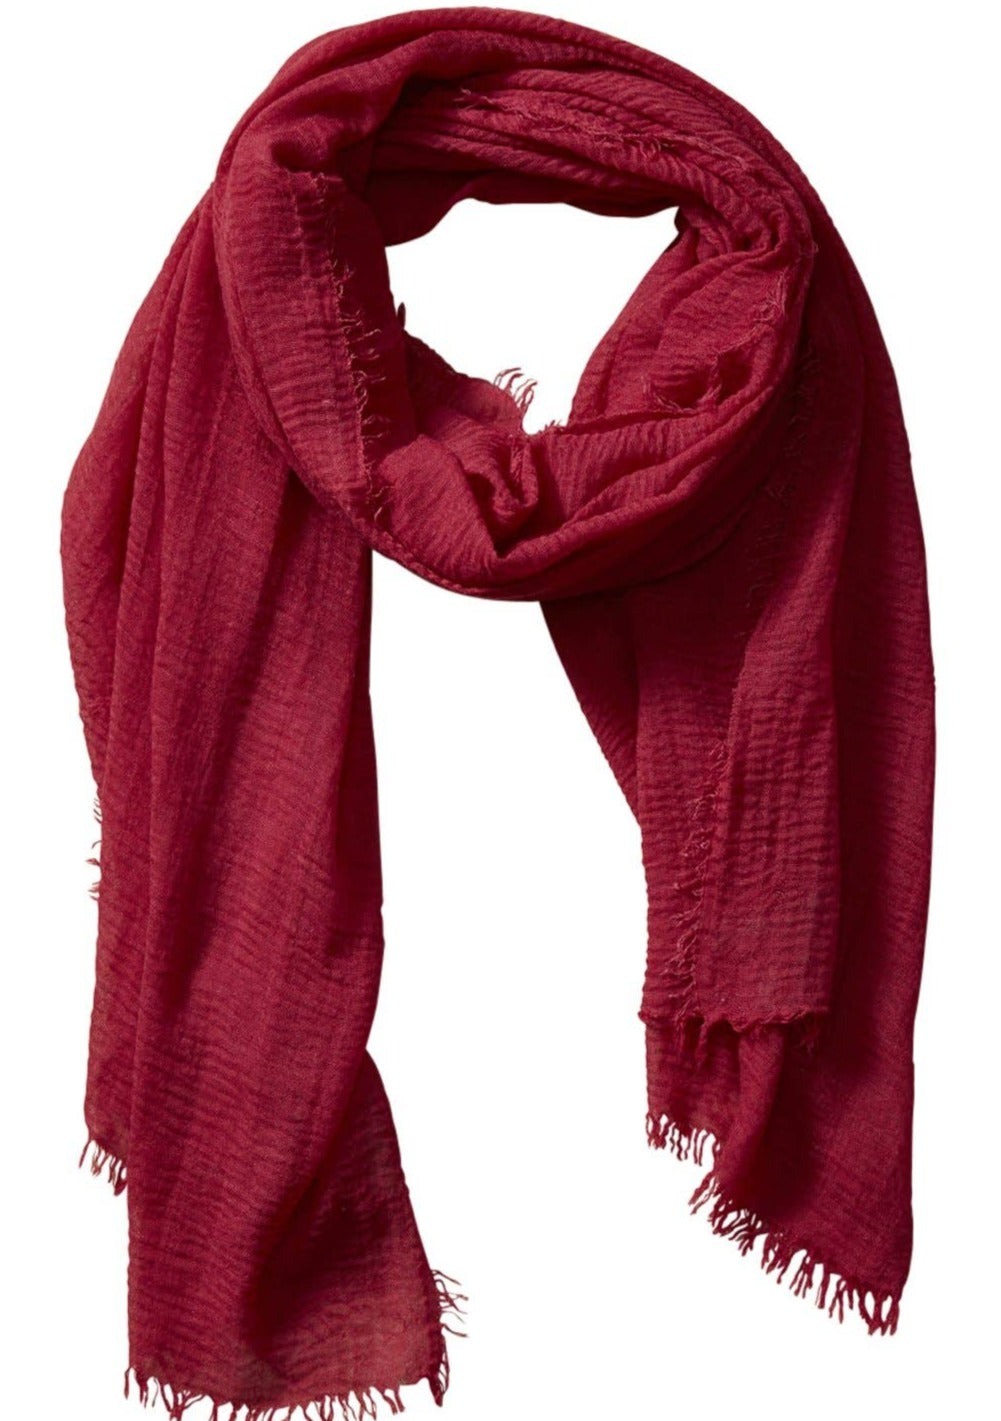 Classic Insect Shield Scarf - Red Hadley Wren Scarves